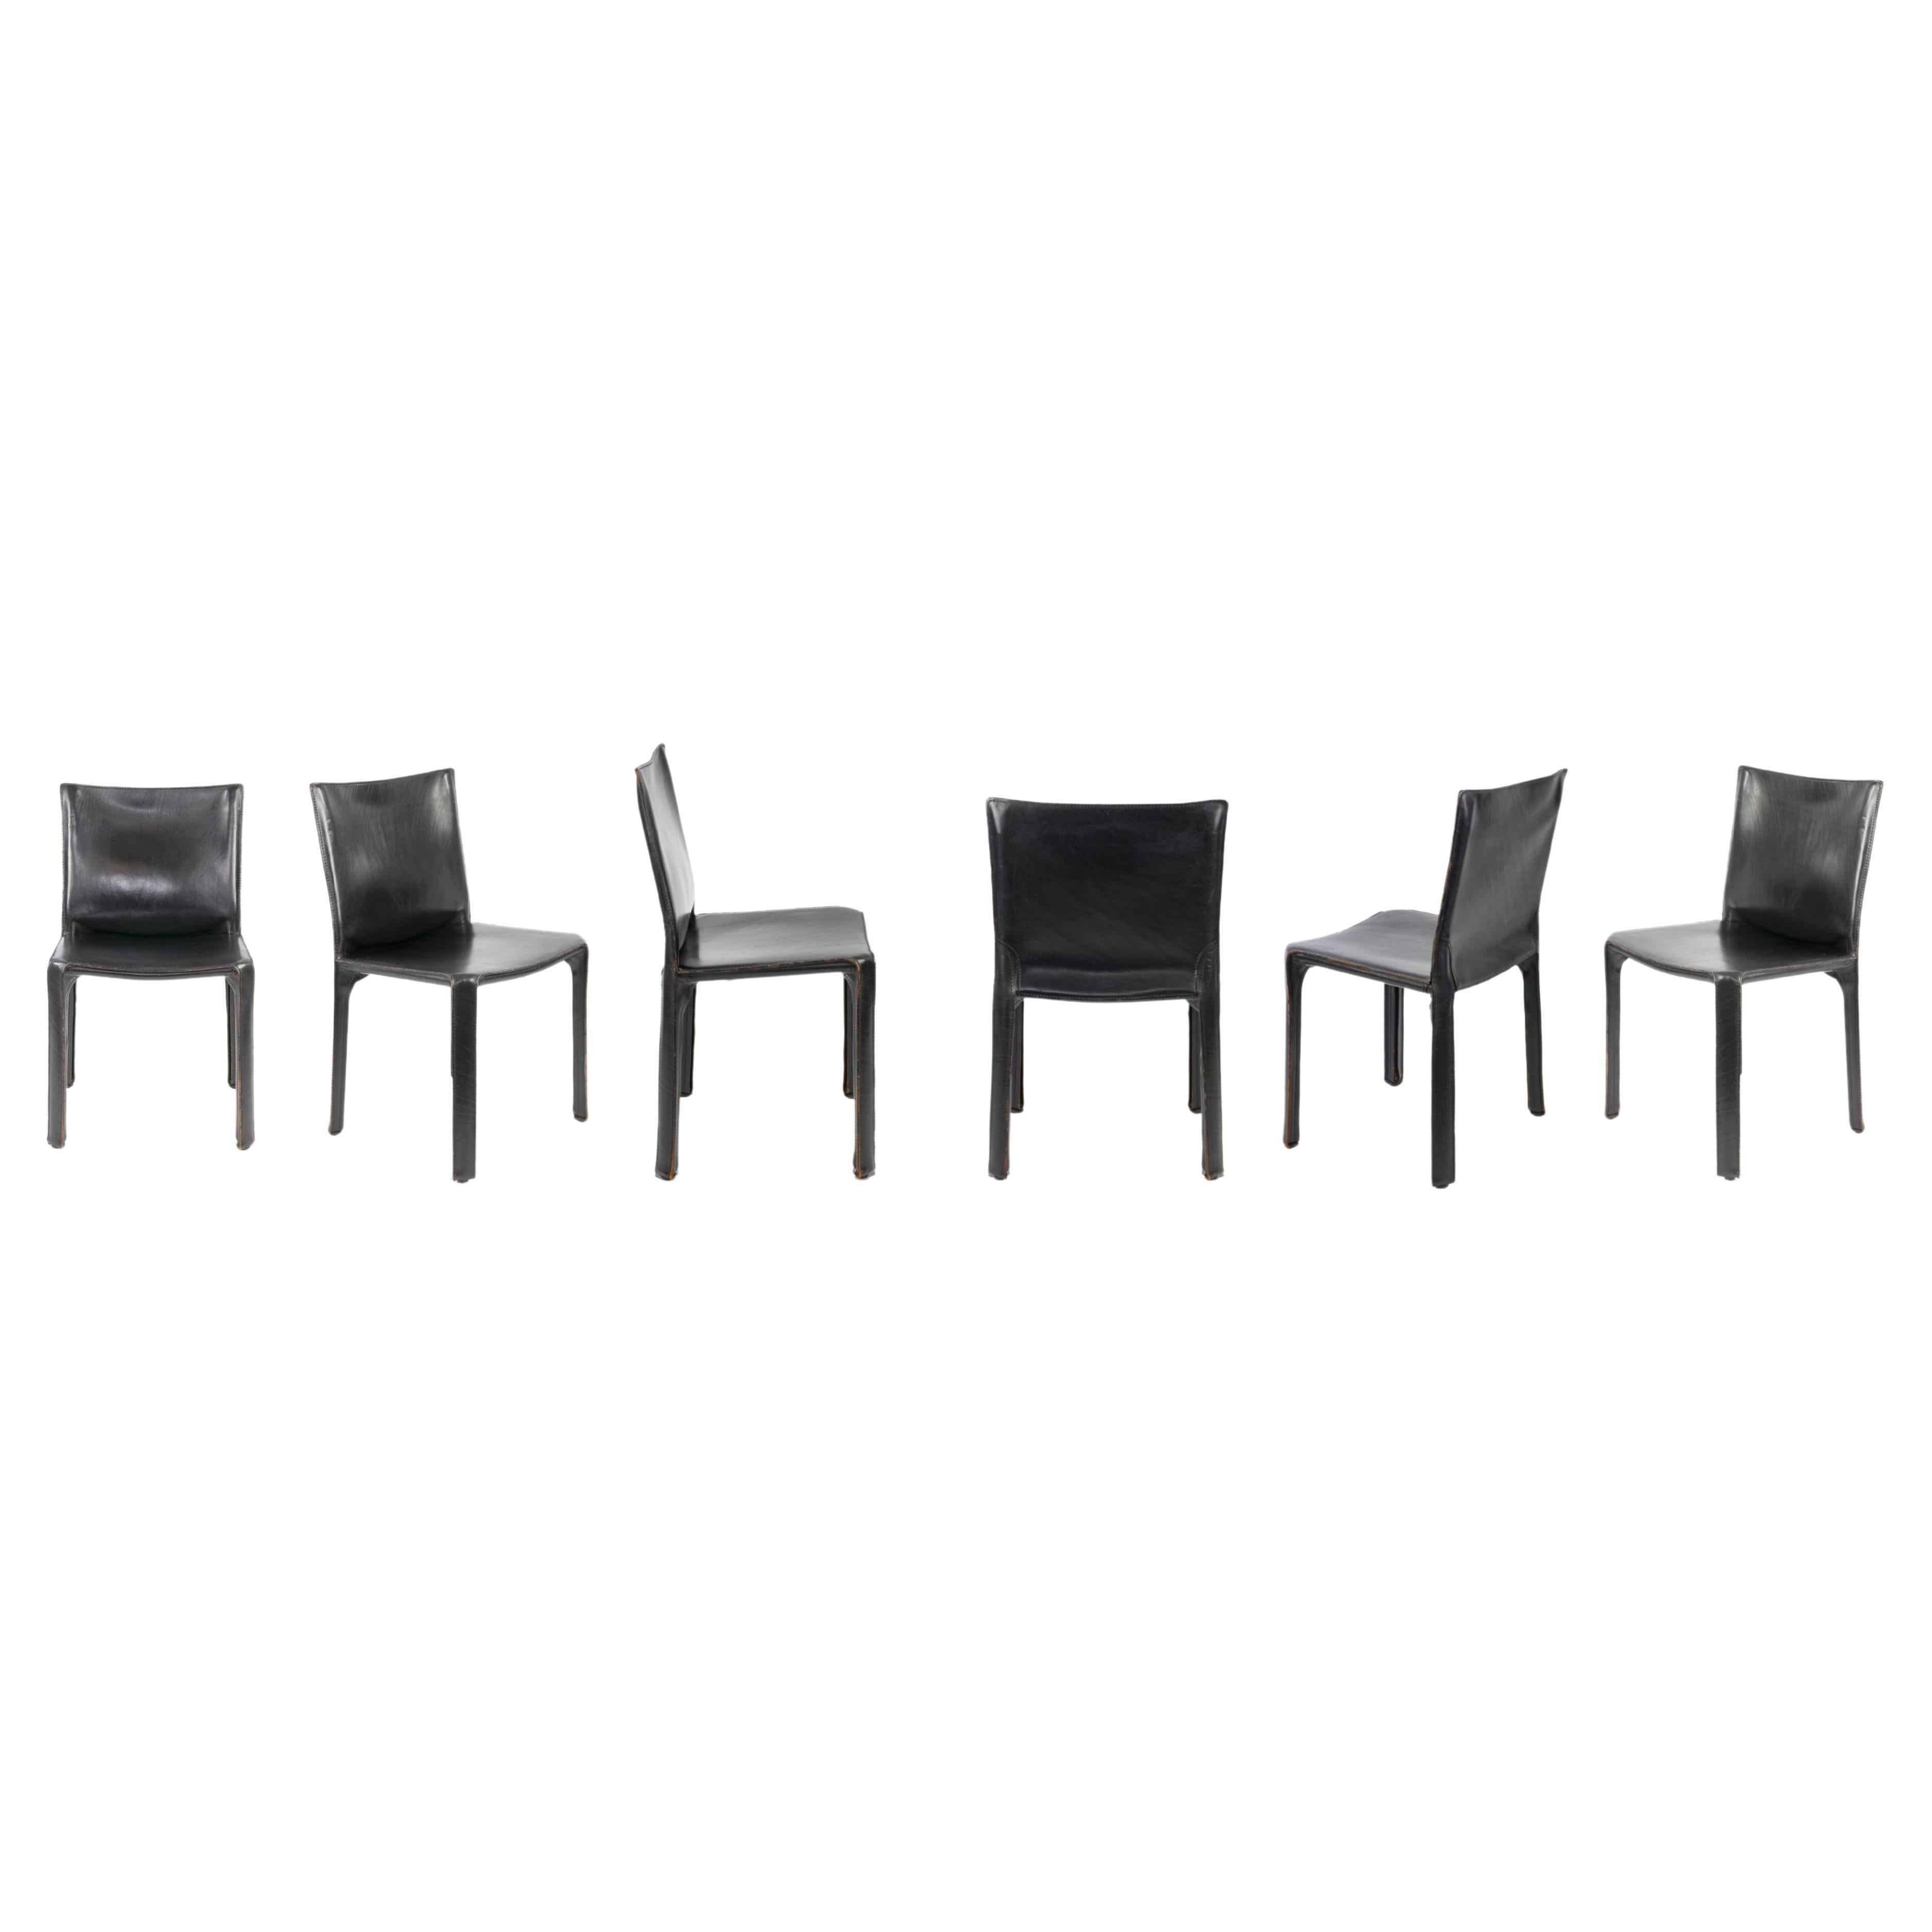 Six CAB 412 Chairs by Mario Bellini for Cassina, Italy 1977 For Sale